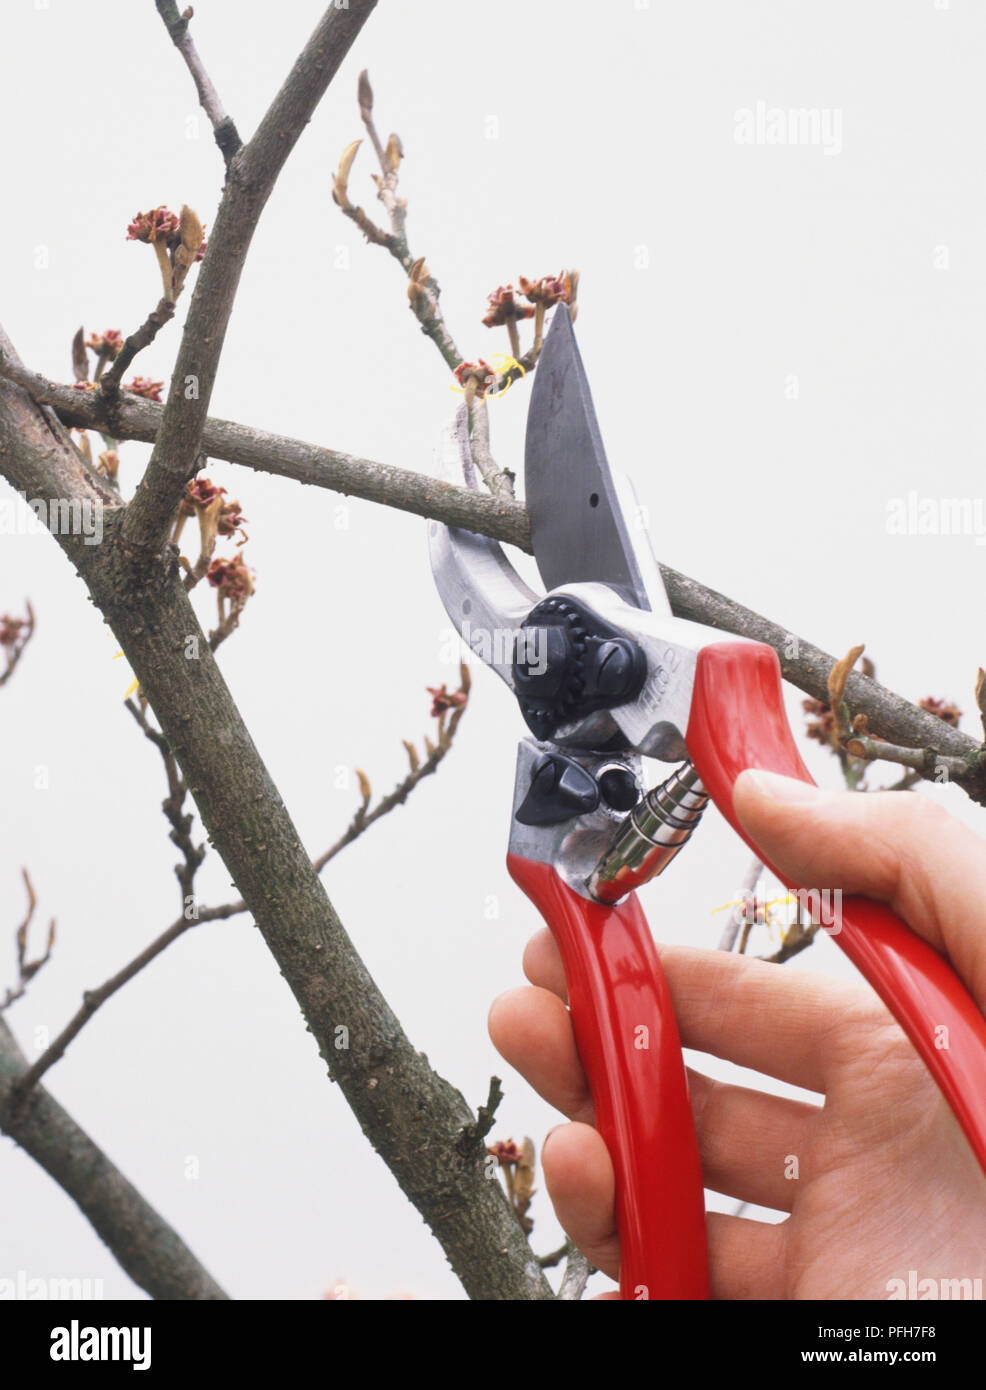 Cutting branch using secateurs Stock Photo